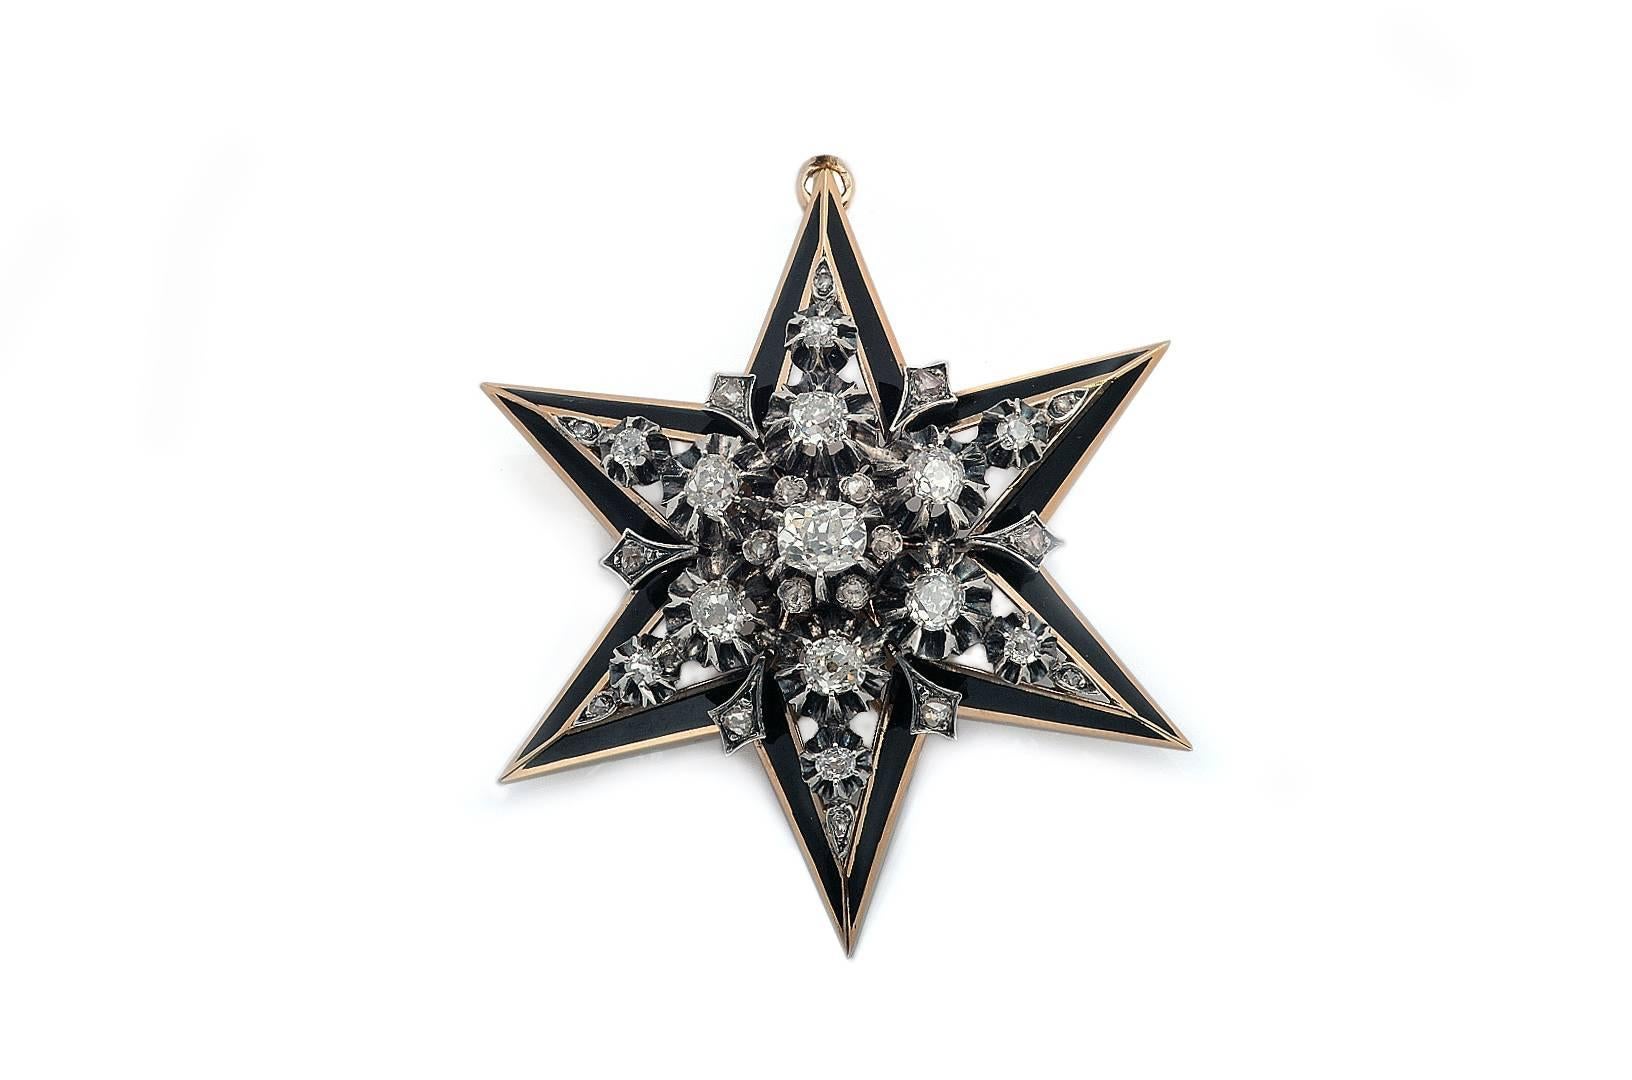 Made of silver and 18 Kts. Gold in the form of a six pointed Star Brooch. It showcases an important cushion cut diamond weighing 0´65 carats aprox., at its center. It´s surrounded by old European-cut diamonds, rose cut-diamonds weighing 2´50 carats